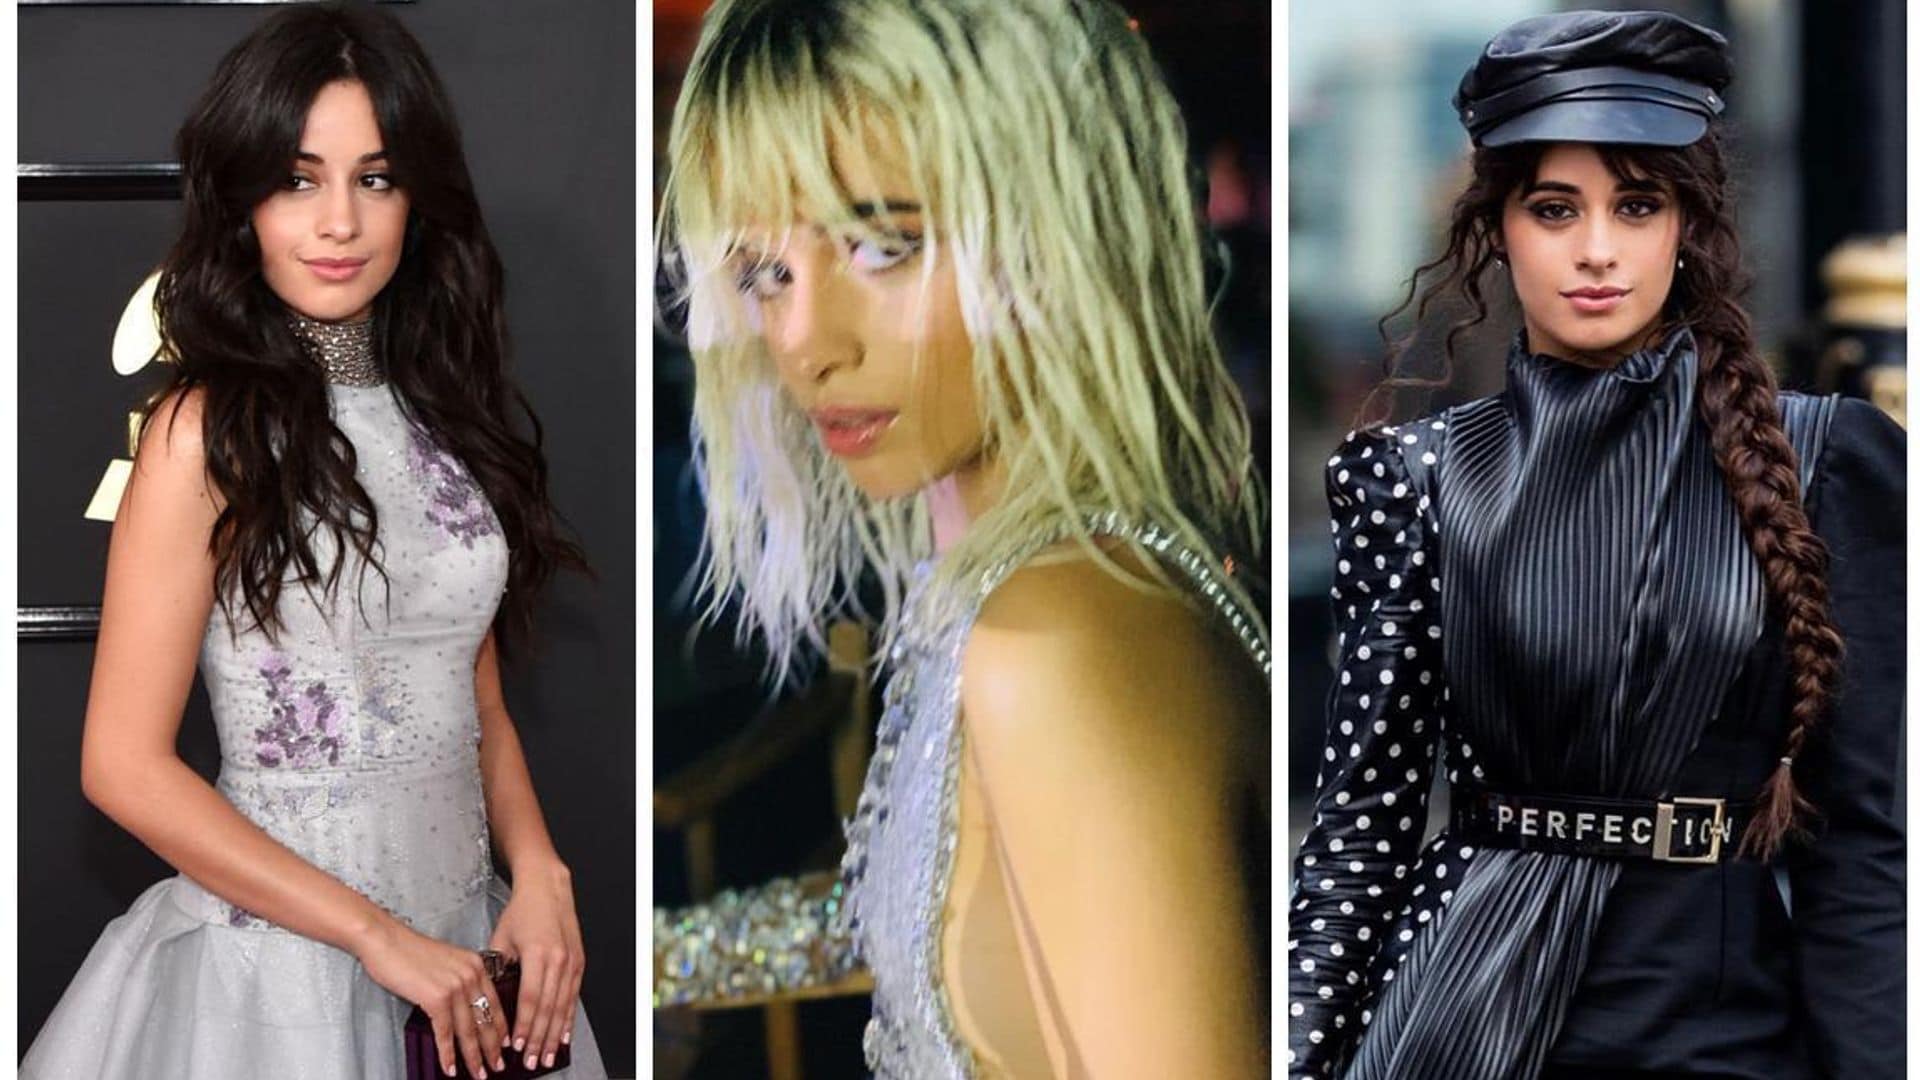 Camila Cabello’s best hairstyles, from bangs to bobs: photos